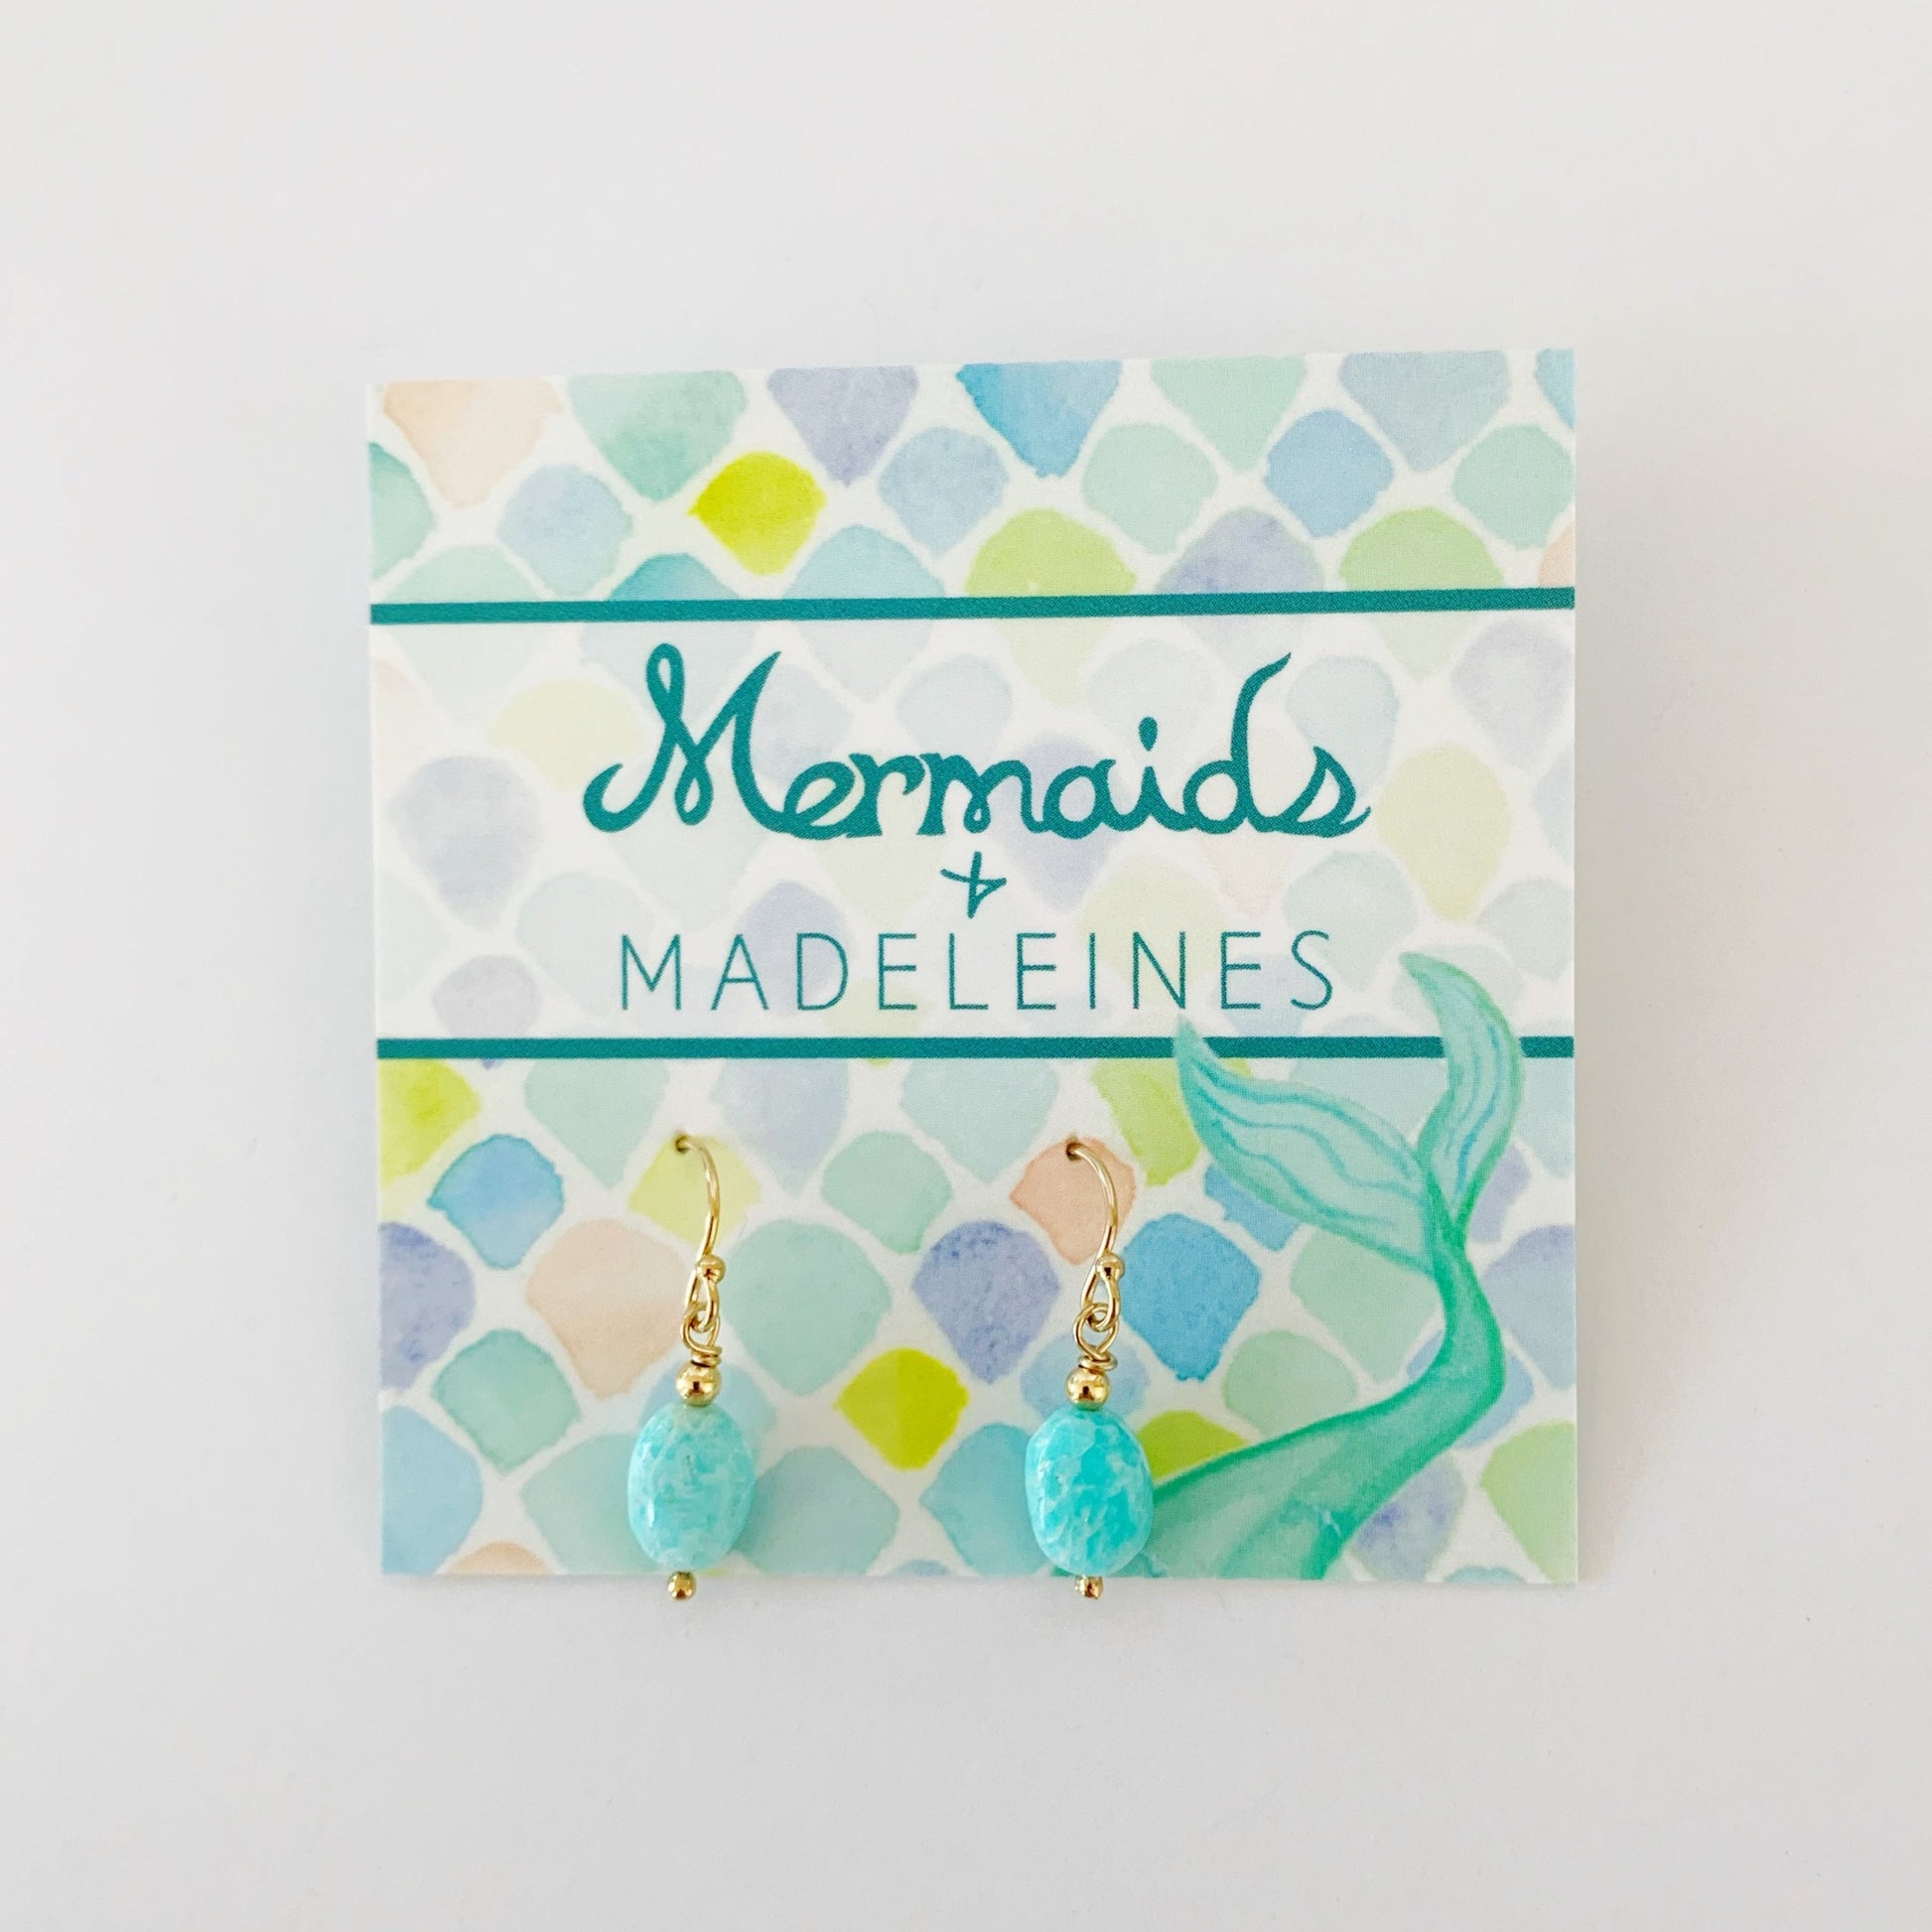 The laguna earrings in 14k gold filled. This pair is created with 14k gold filled beads and findings and bright aqua oval shaped beads. This pair is pictured on a mermaids and madeleines earring card and photographed on a white background